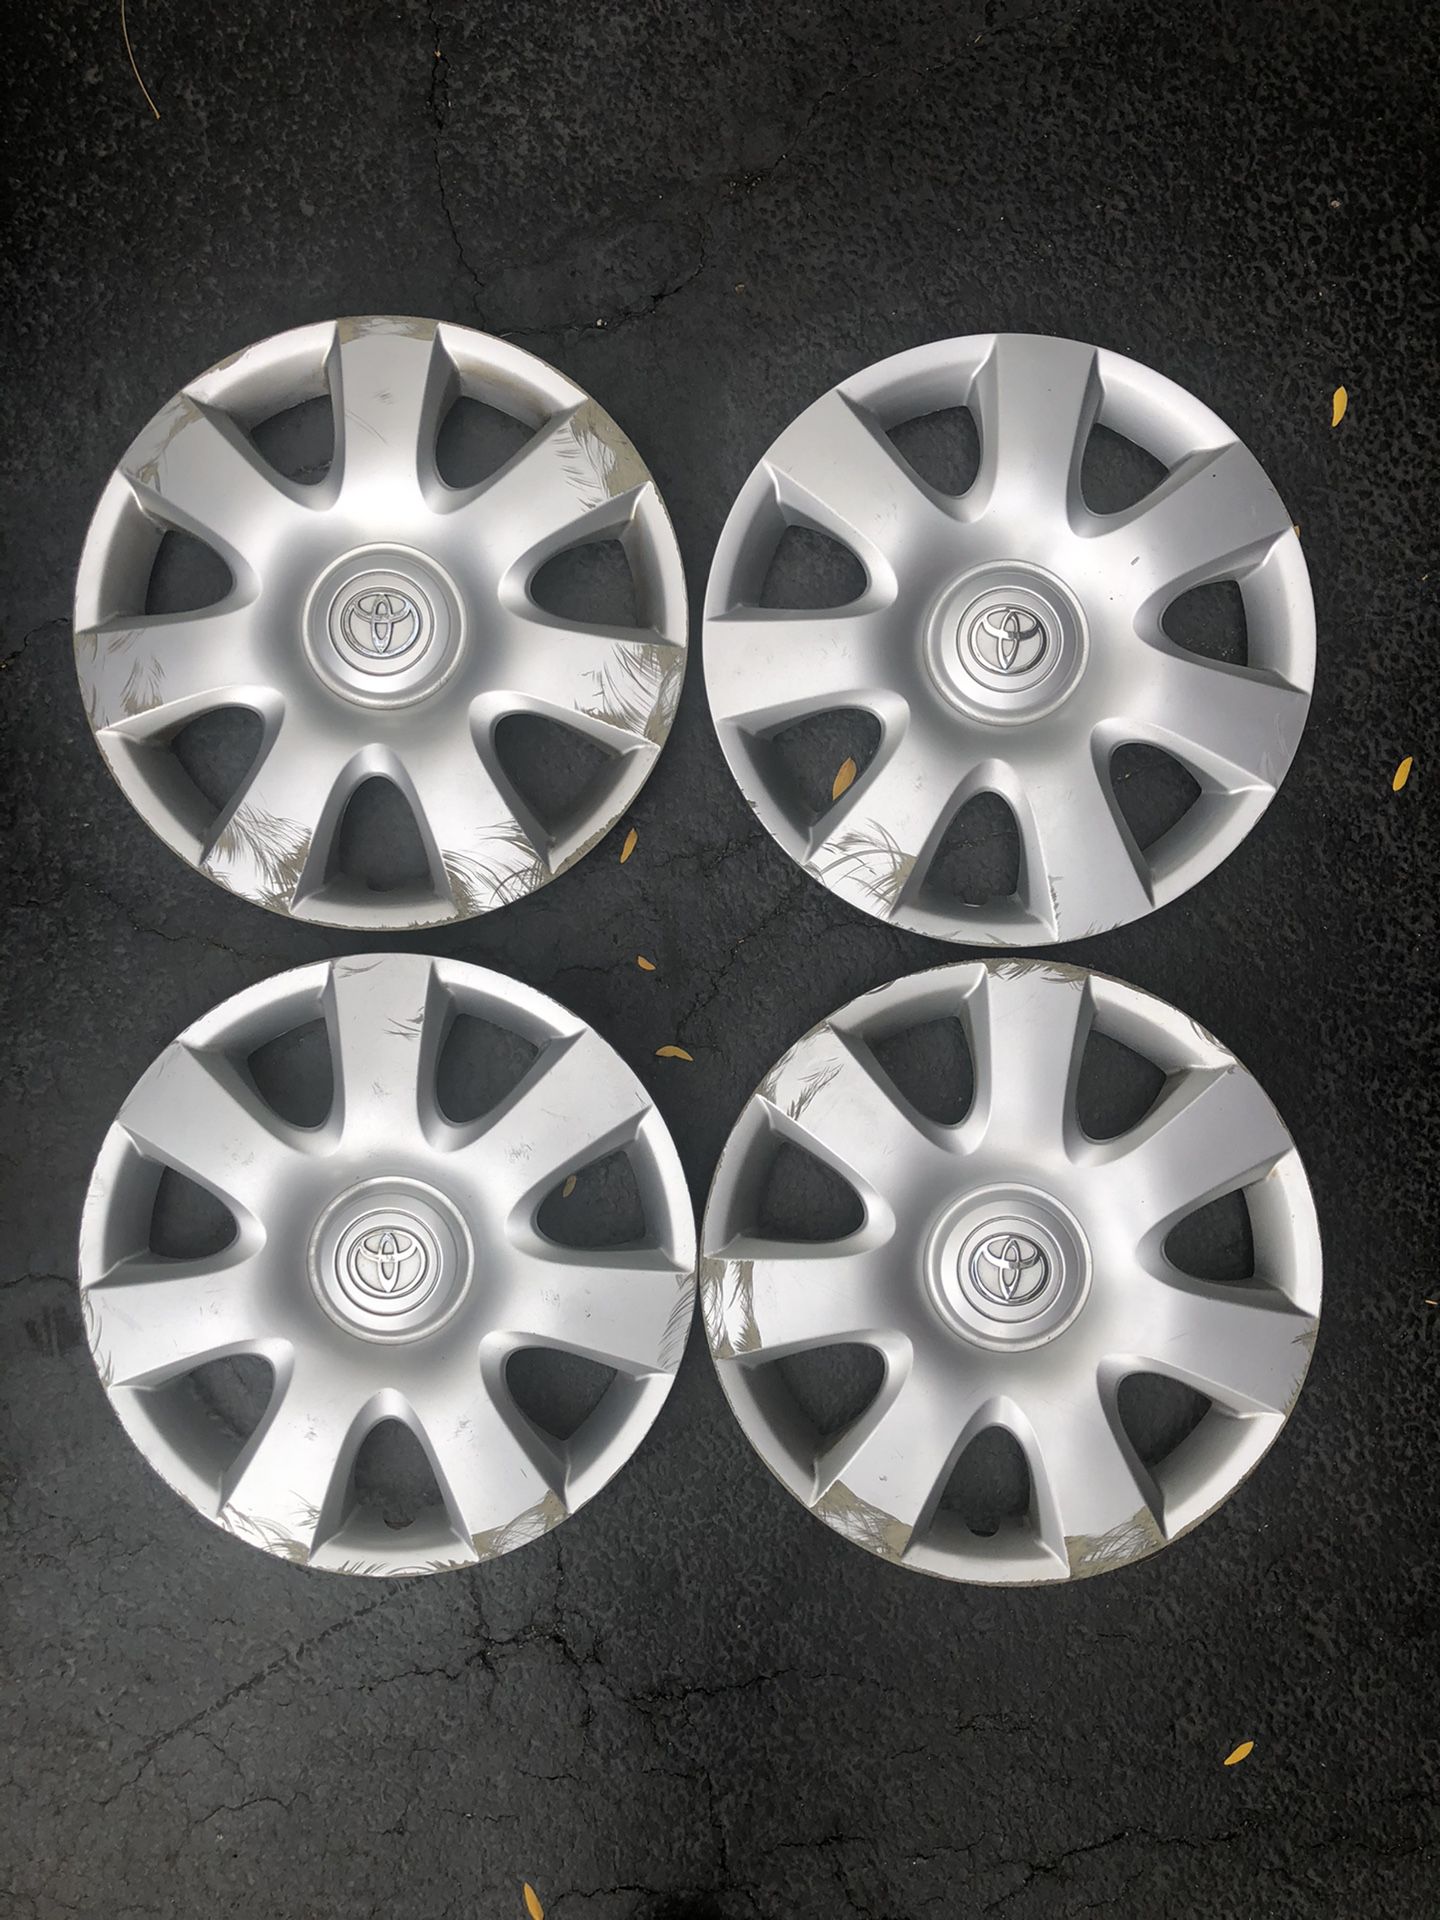 FREE. 15” steel wheels and hubcaps from 2004 Camry